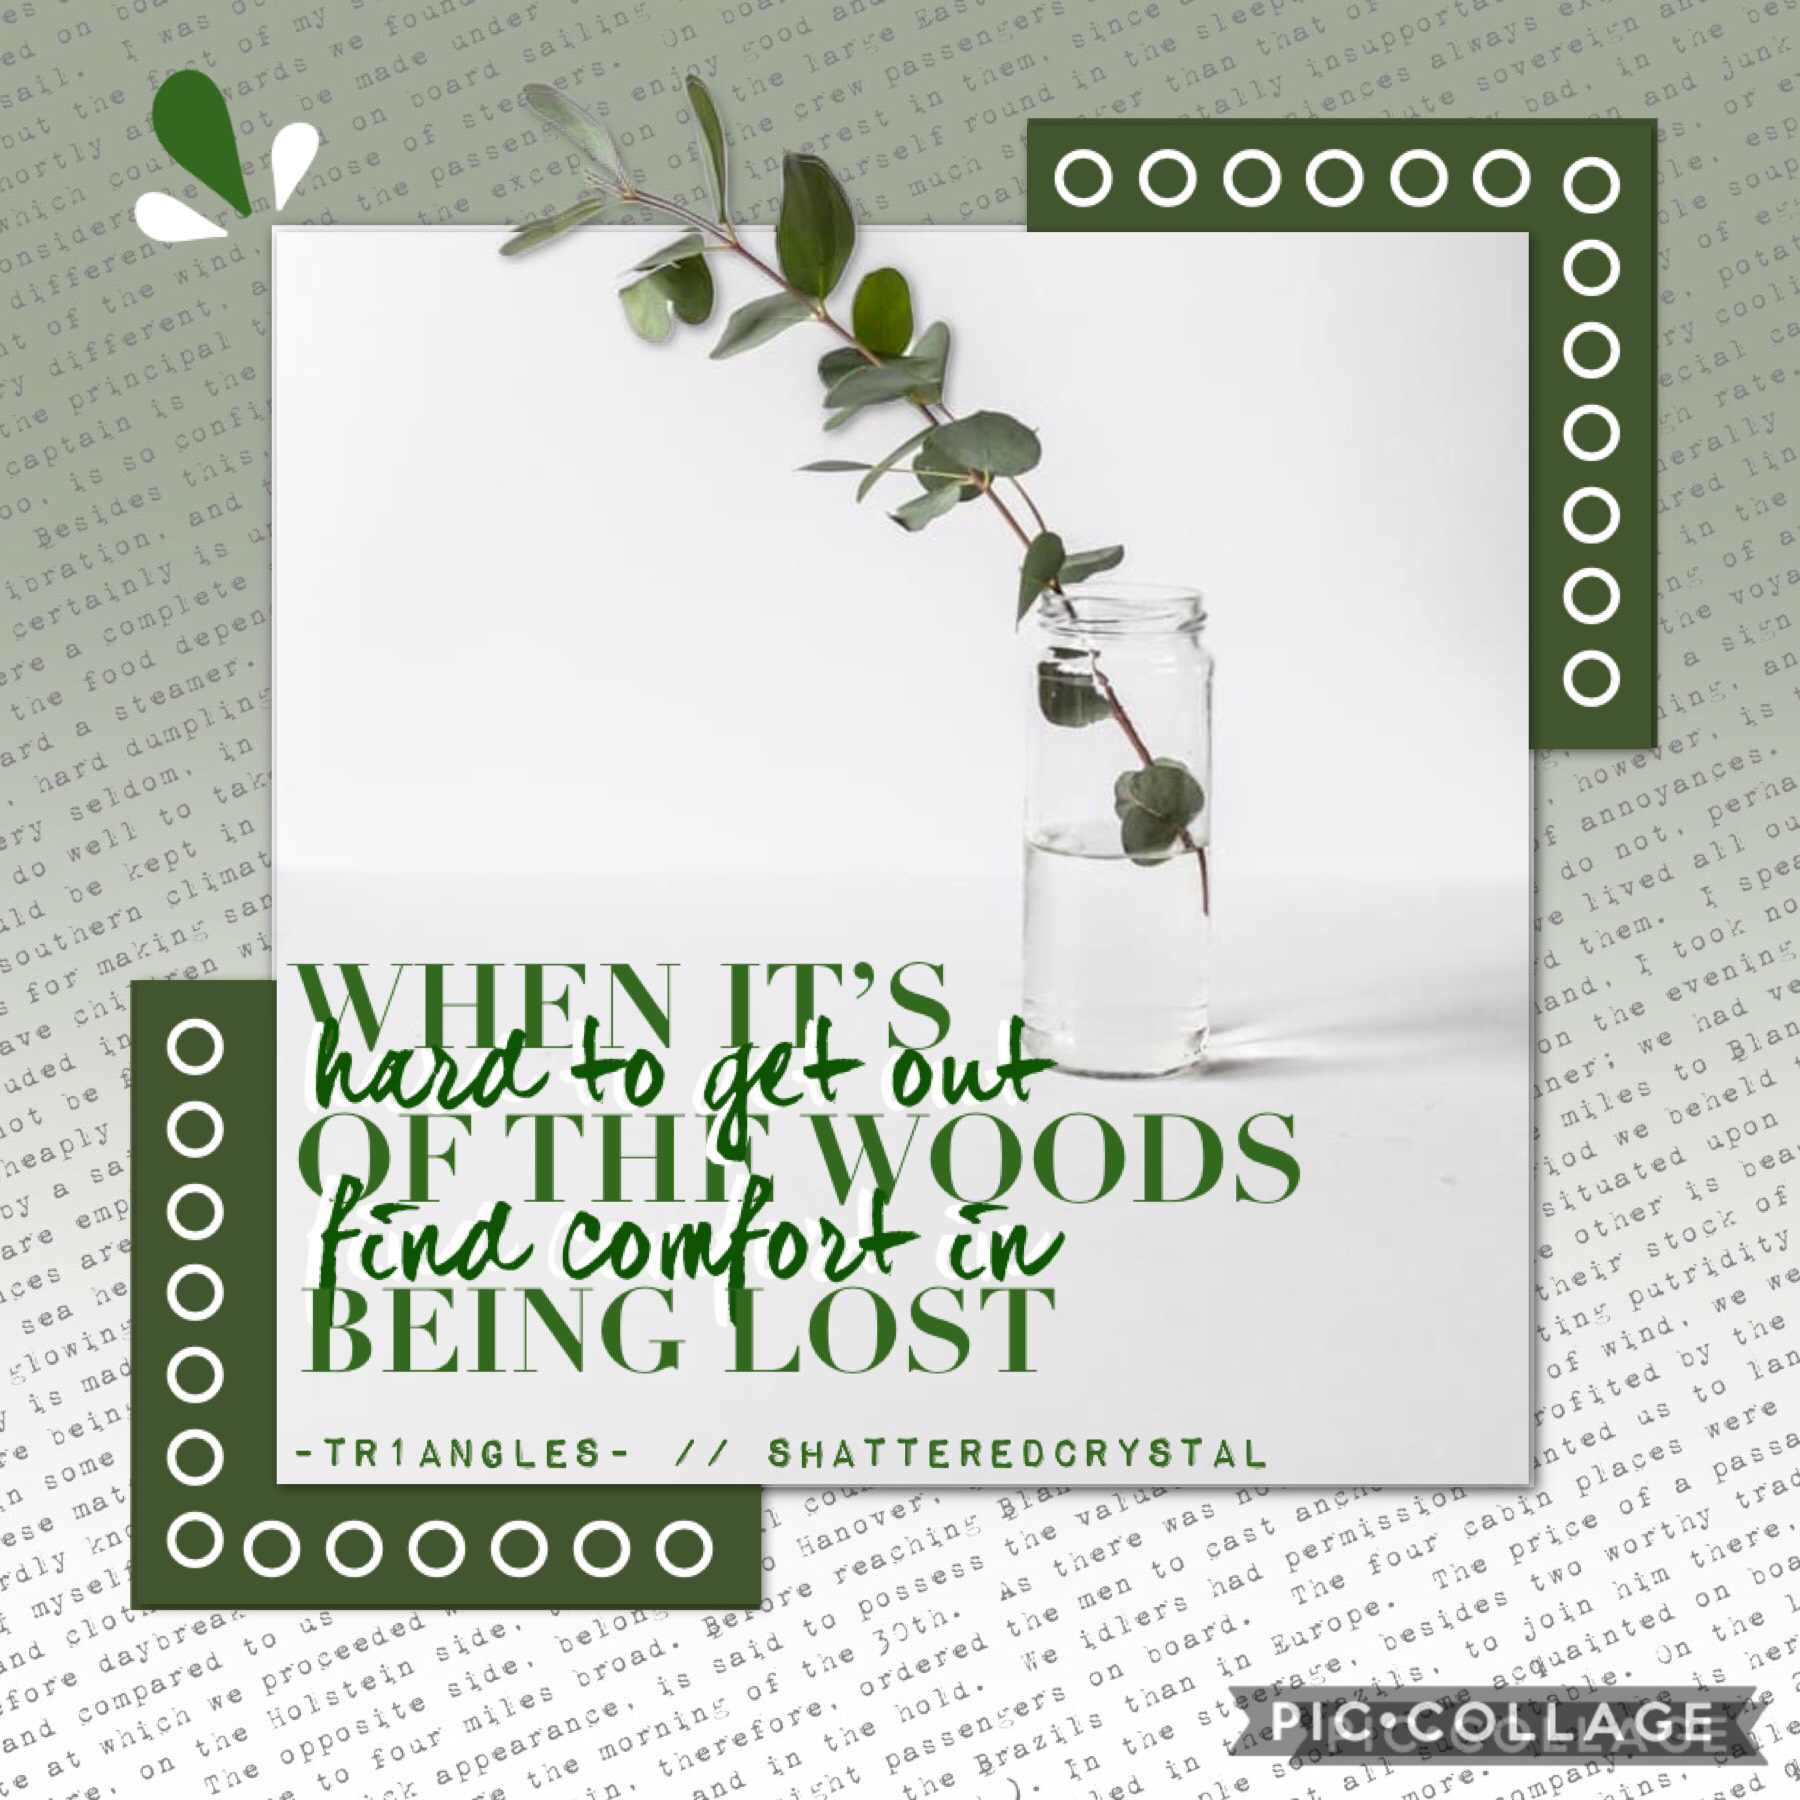 🍃 COLLAB WITH 🍃 
ShatteredCrystal!!
She’s an amazing collab partner and super talented! Go follow her :)
I did the text and she chose the quote and background!
QOTD: Green thumb?
AOTD: I like plant... but they don’t like me ;-;